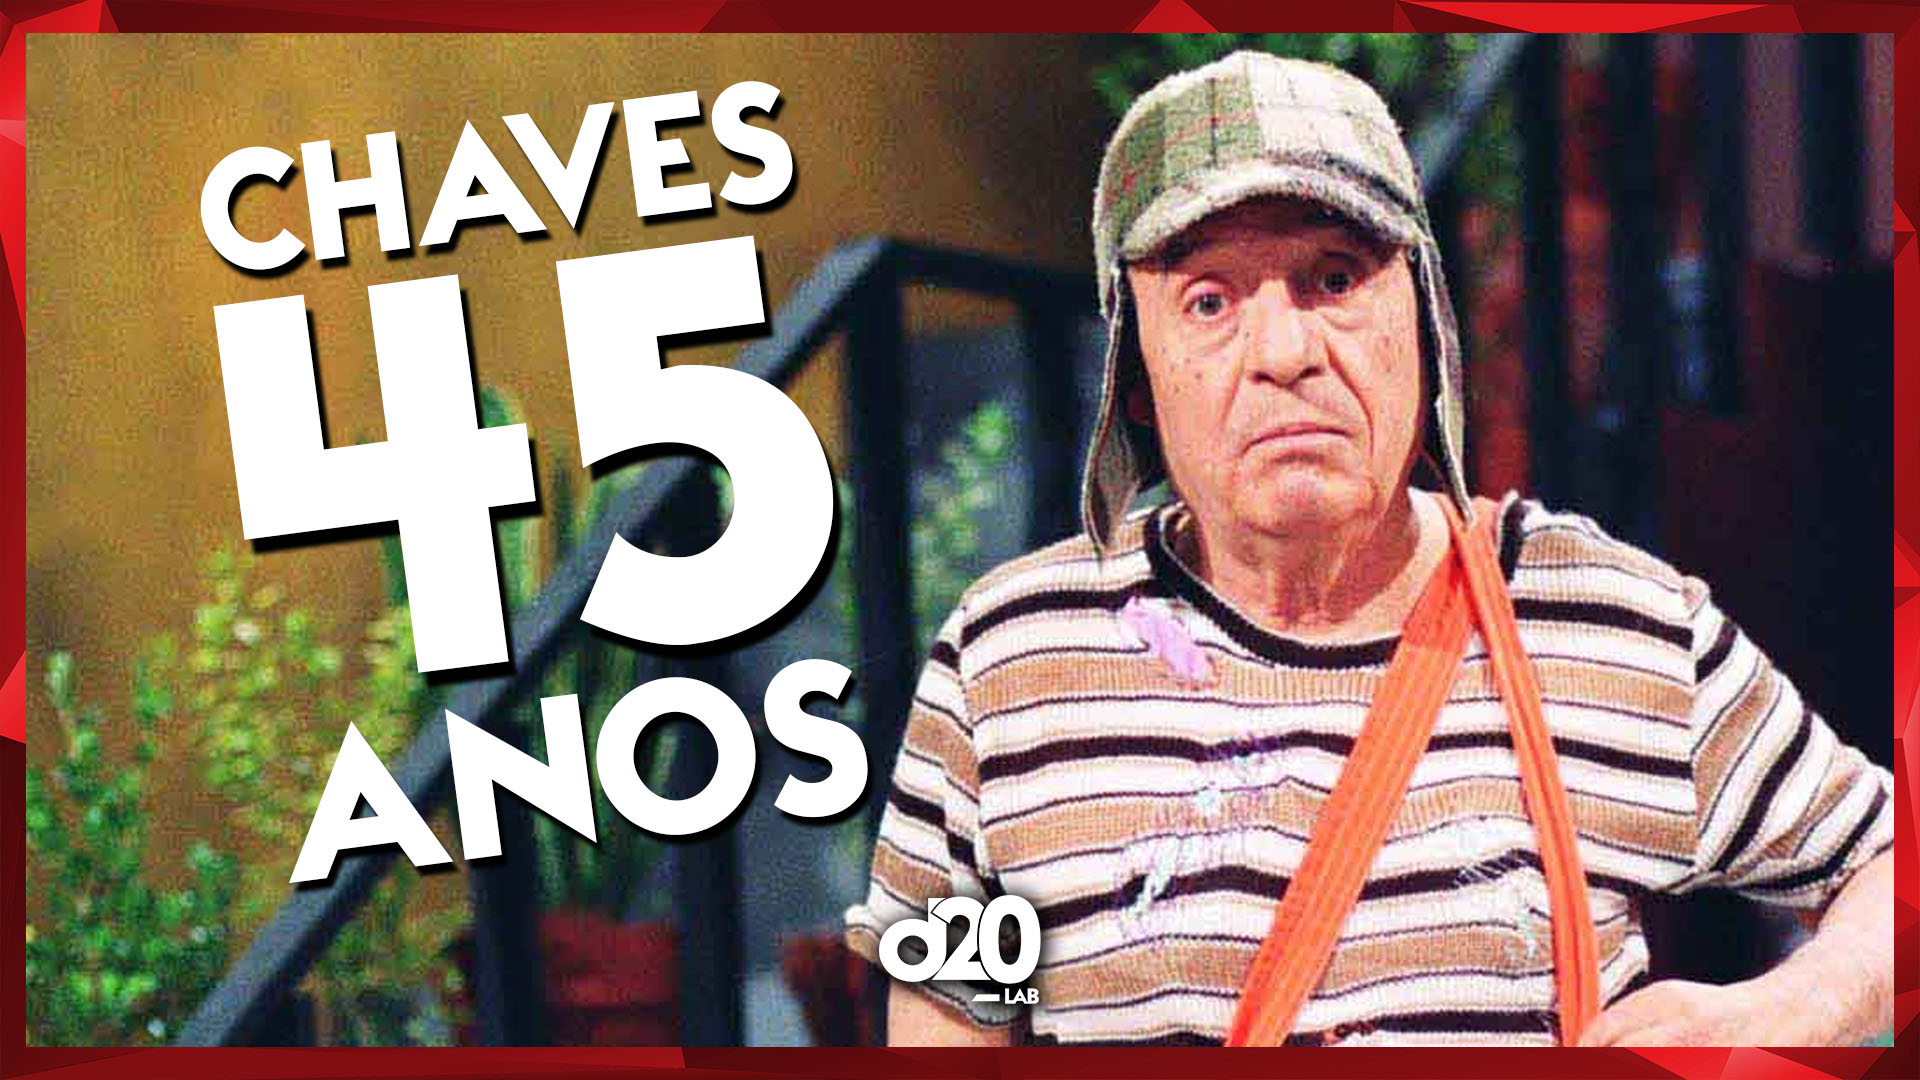 Chaves: 45 anos | D20 Lab 10